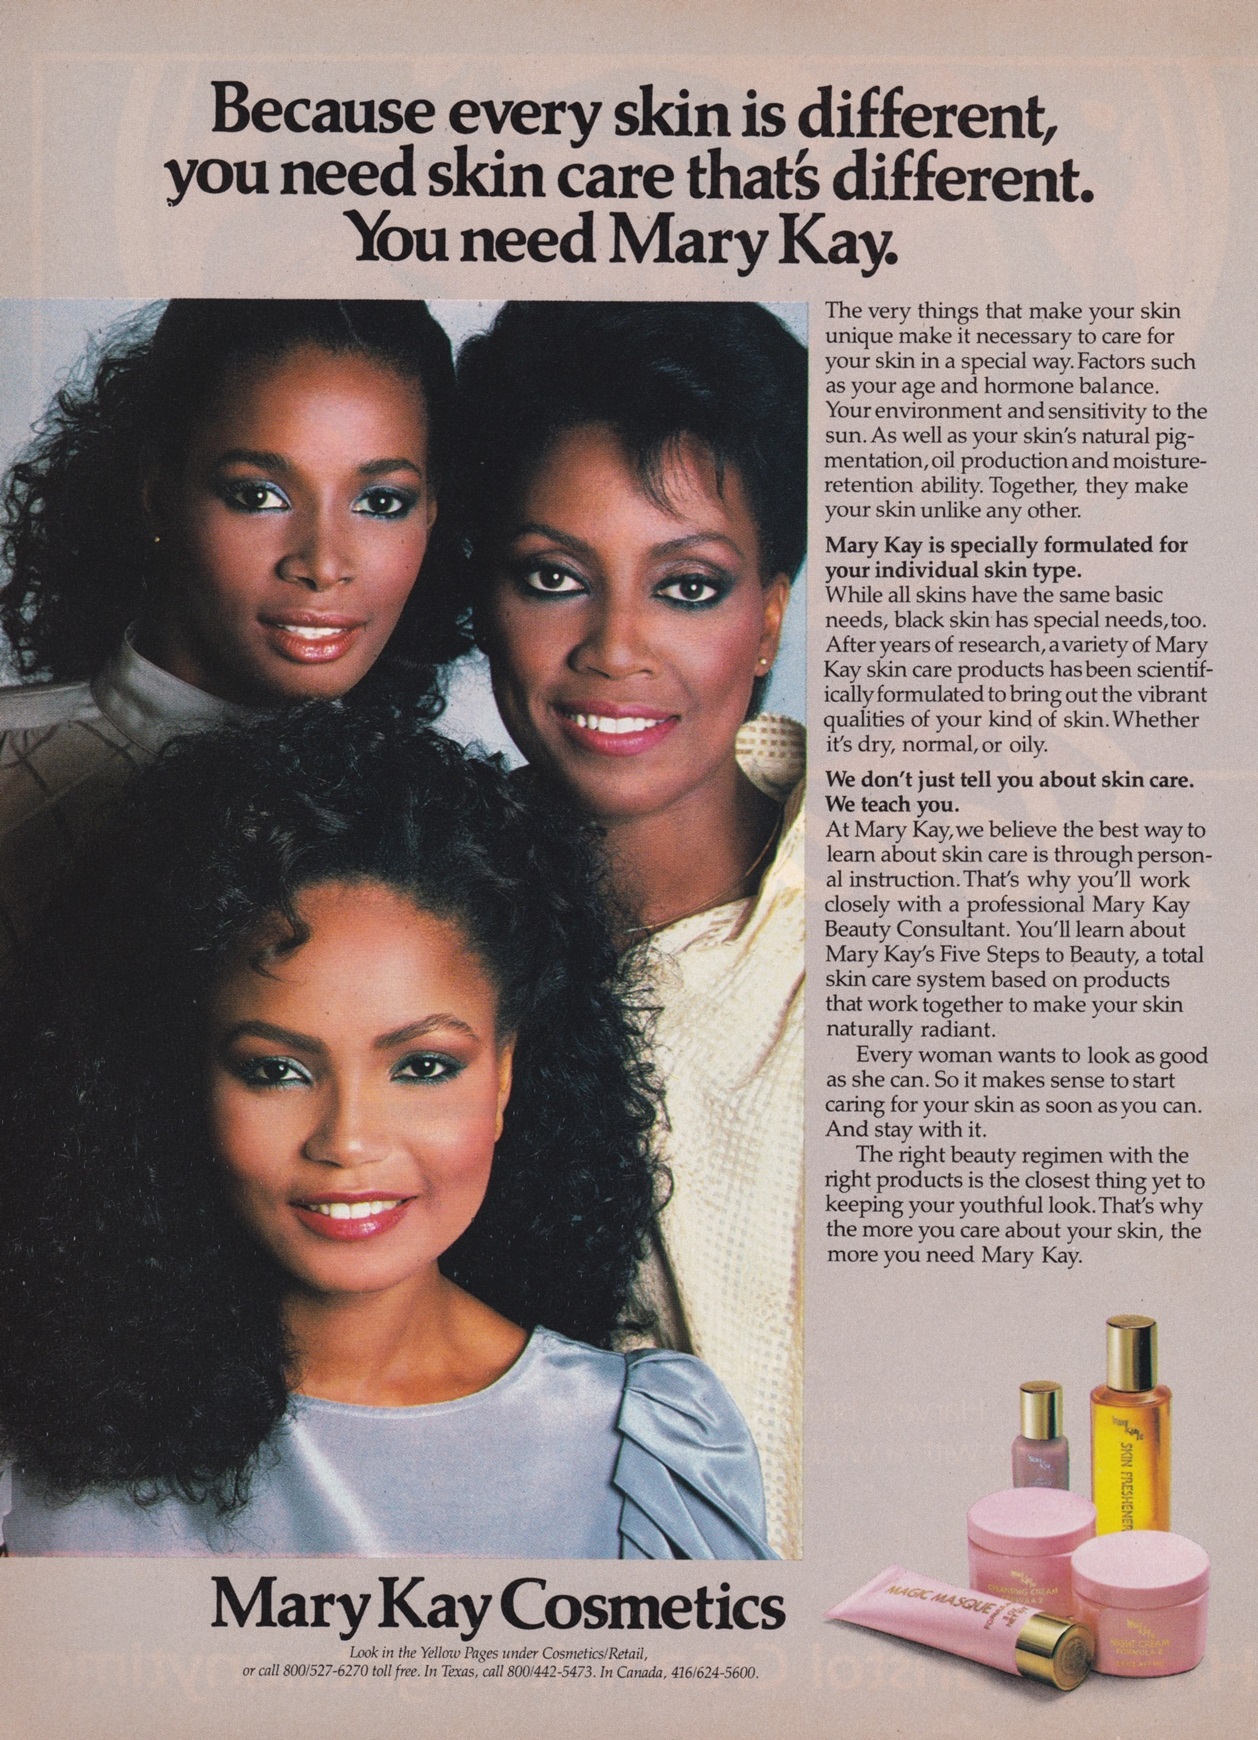 Essence Magazine Pic Appreciation Thread: The 1980s and 70s | Page 12 ...